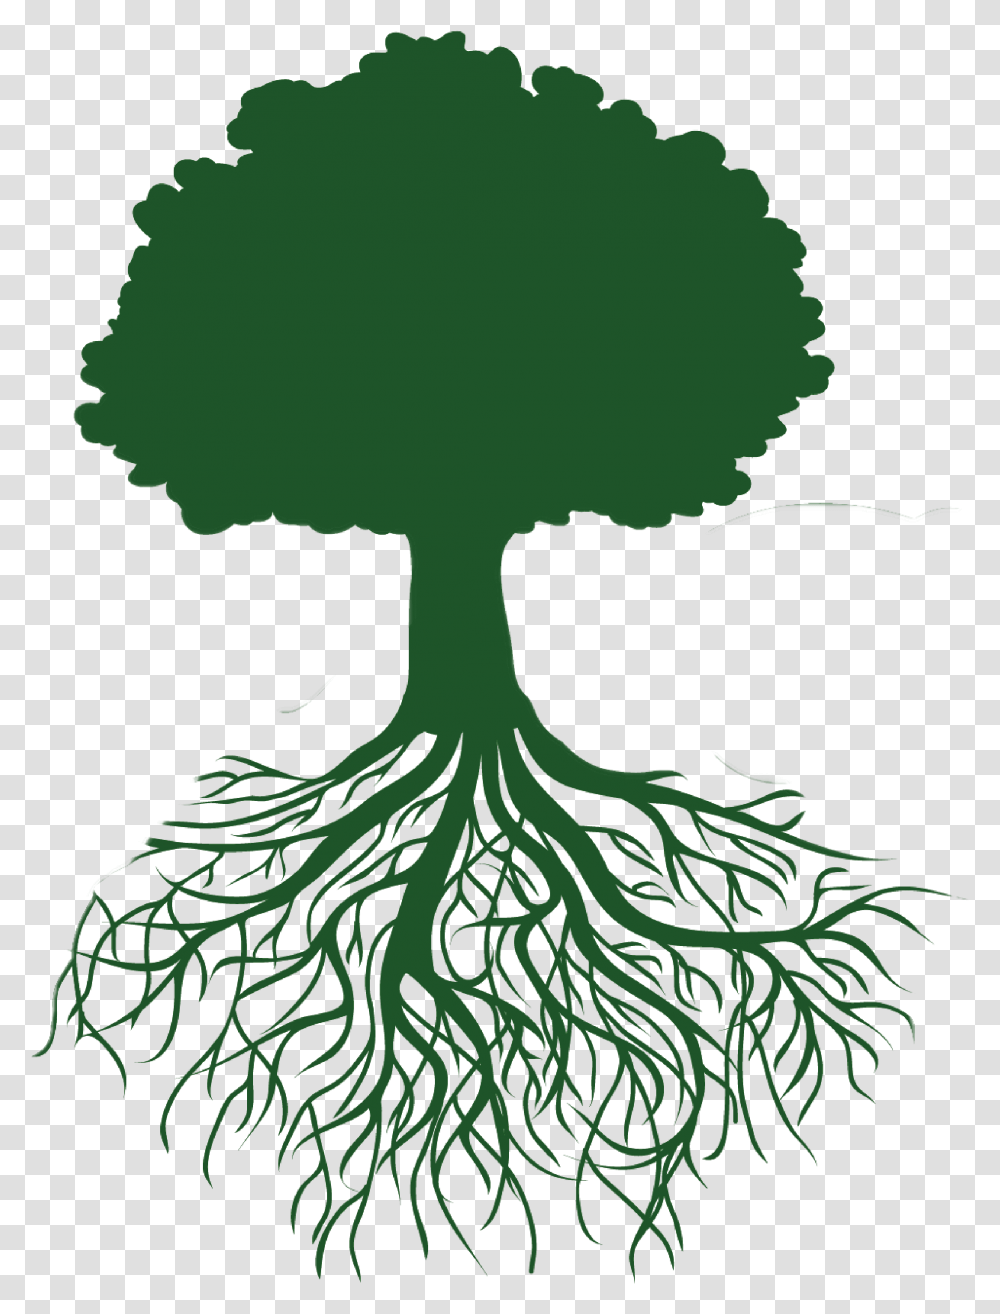 Clip Art Roots Illustration Tree Outline With Roots Transparent Png